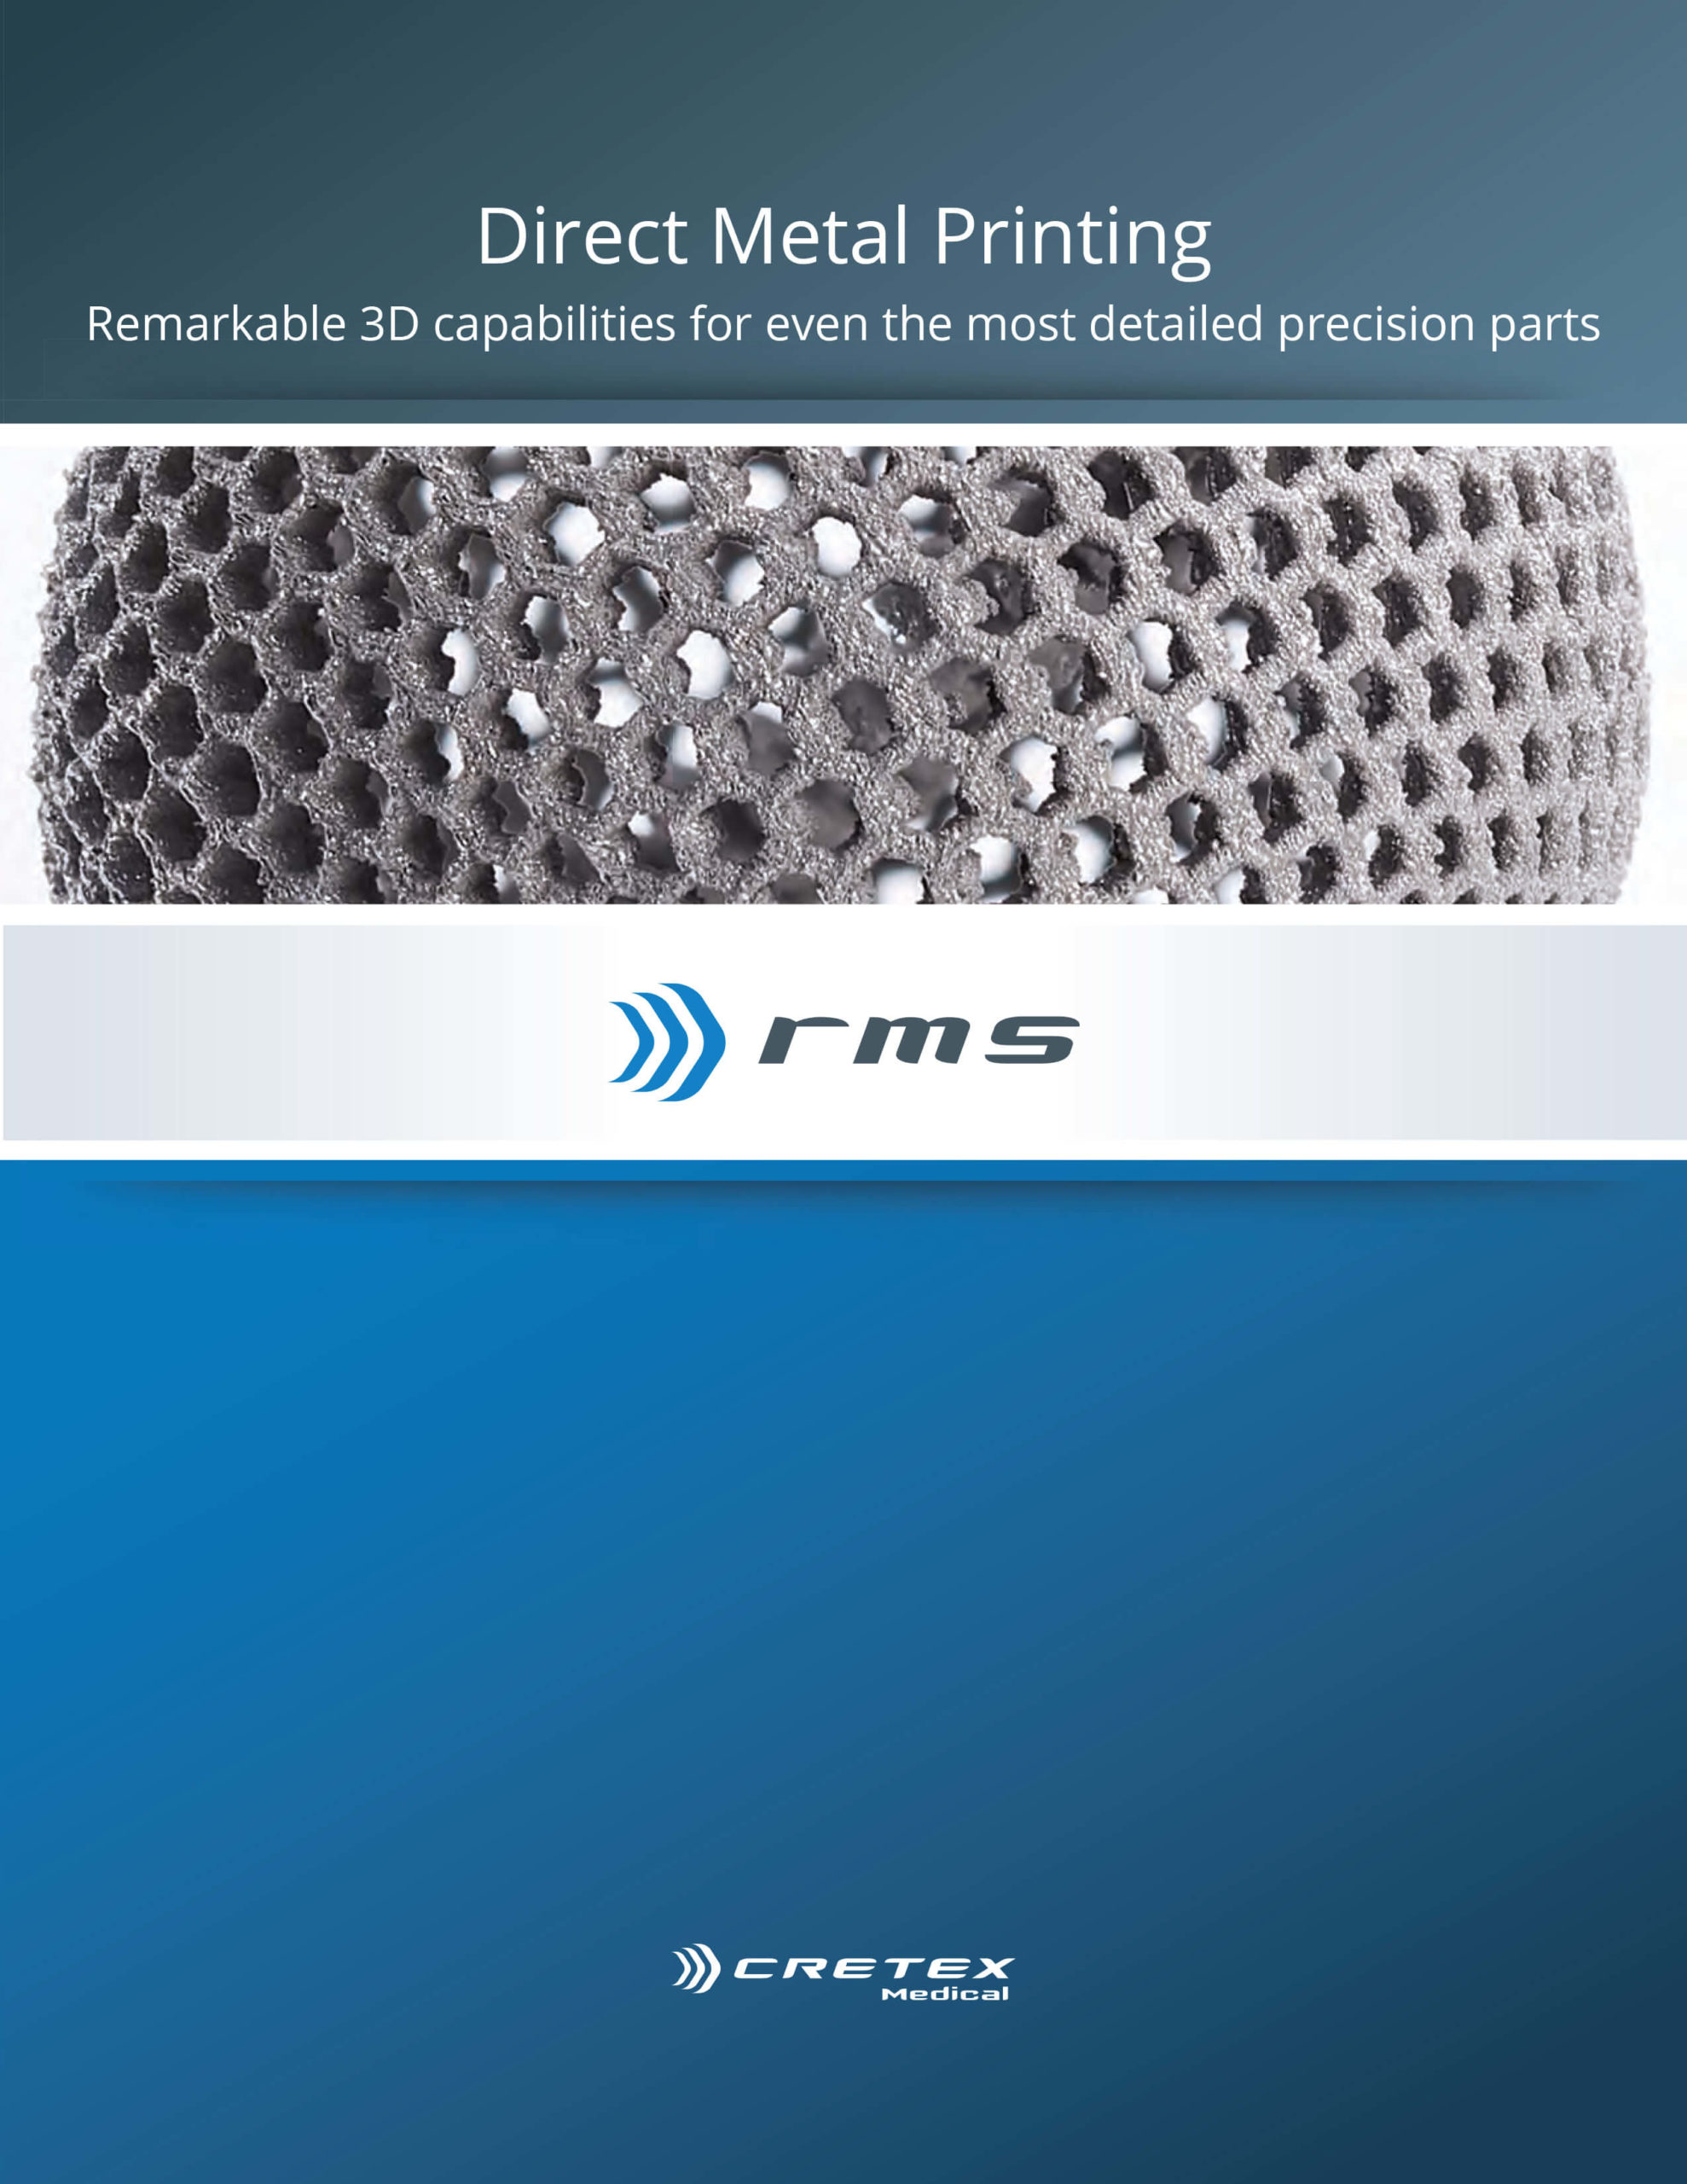 rms-company-dmp-brochure-scaled